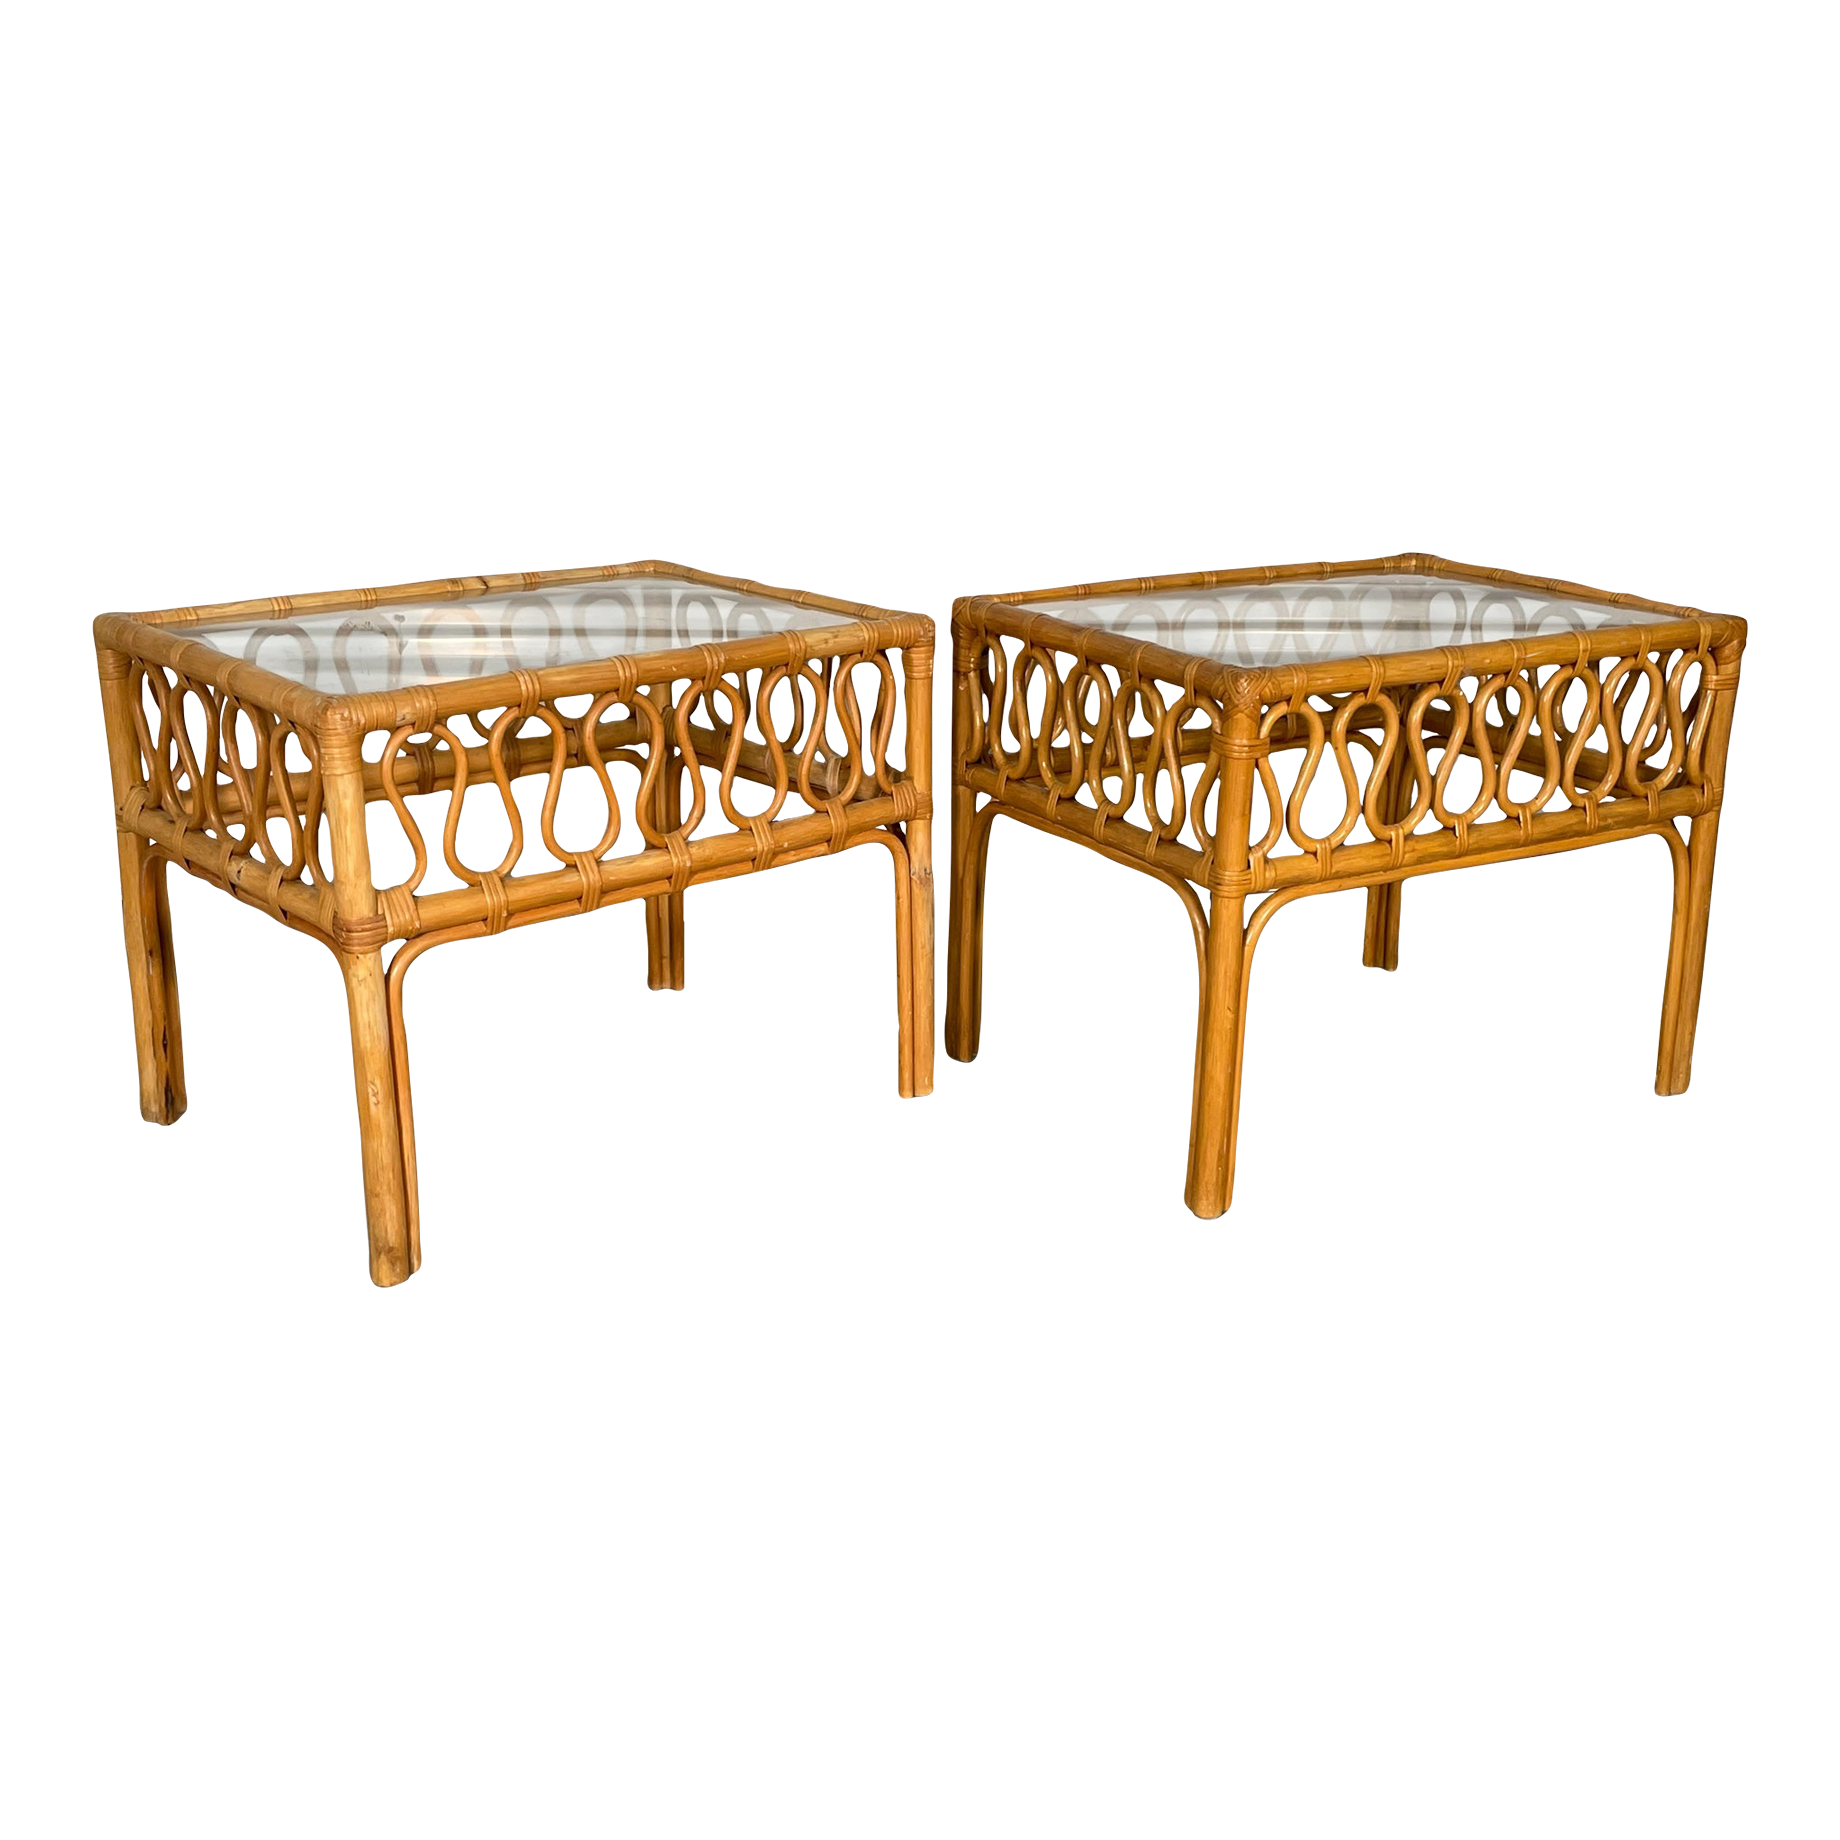 Rattan and Glass End Tables